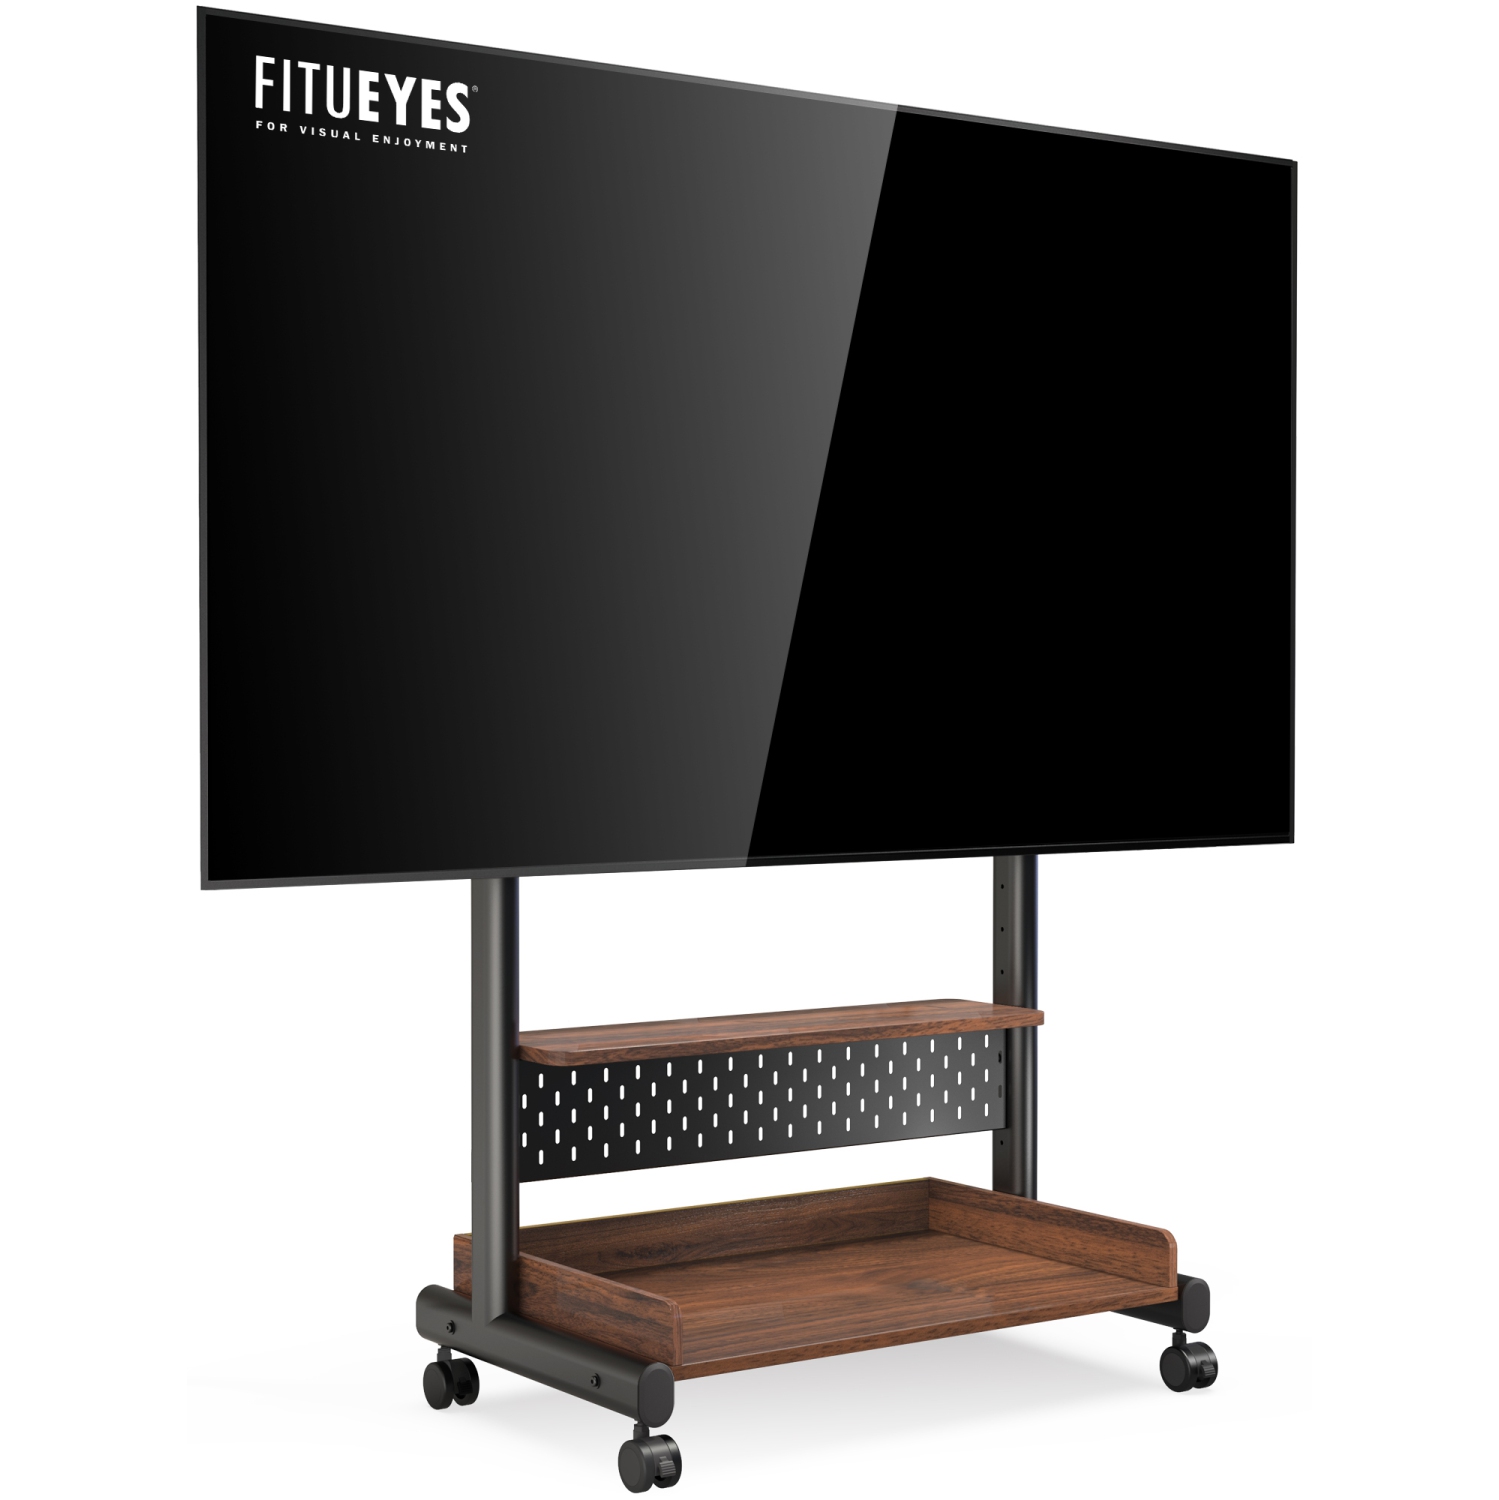 FITUEYES TV Stand with Wheels for 40 to 85 inch LED LCD Flat Screen, Corner TV Stand Mount with Storage, Peg Board & Wooden Shelf TV Console